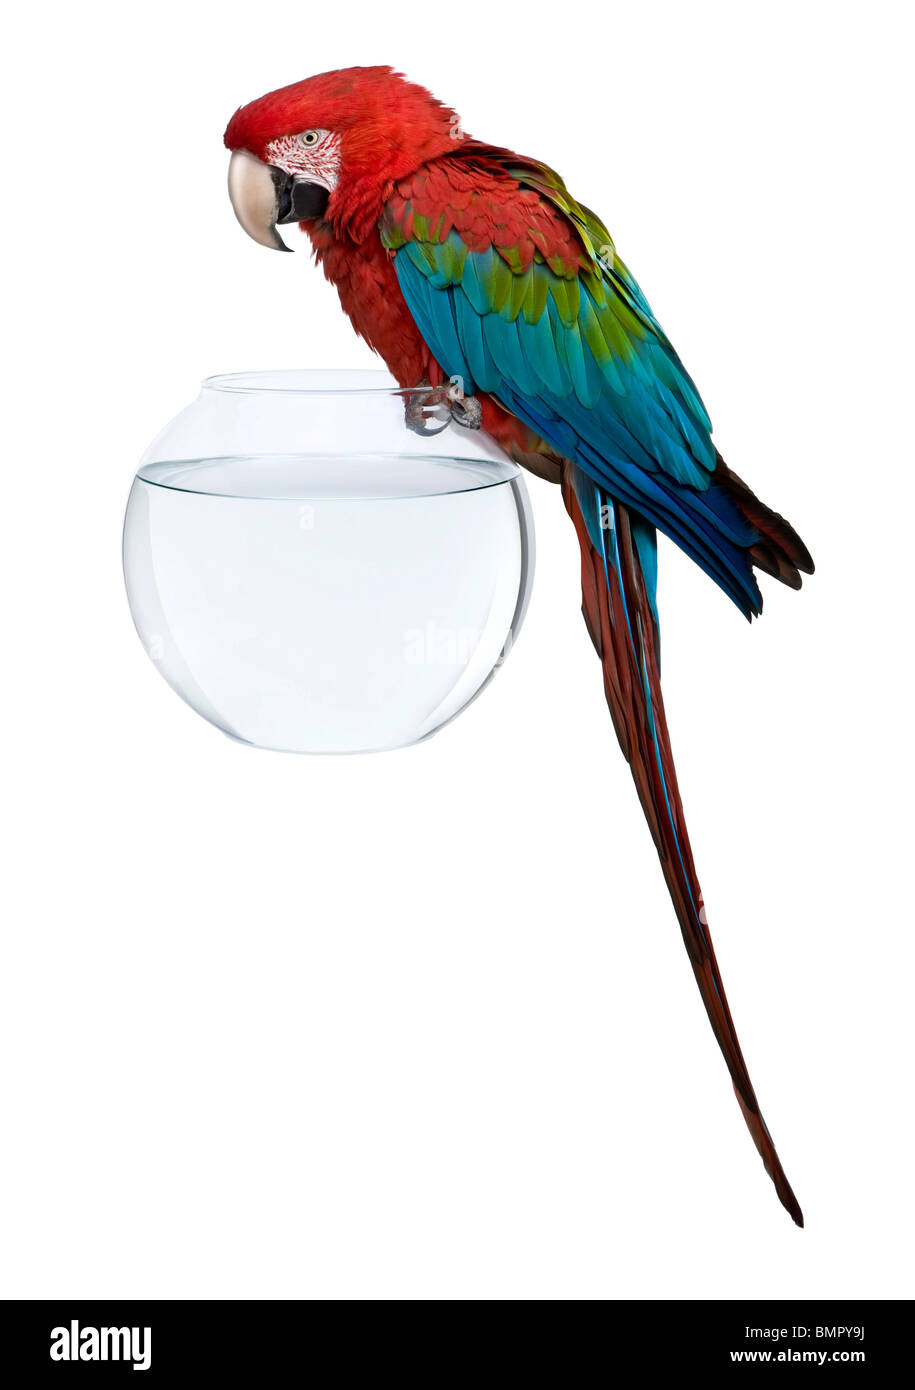 Red-and-green Macaw perching on empty fish bowl in front of white background Stock Photo